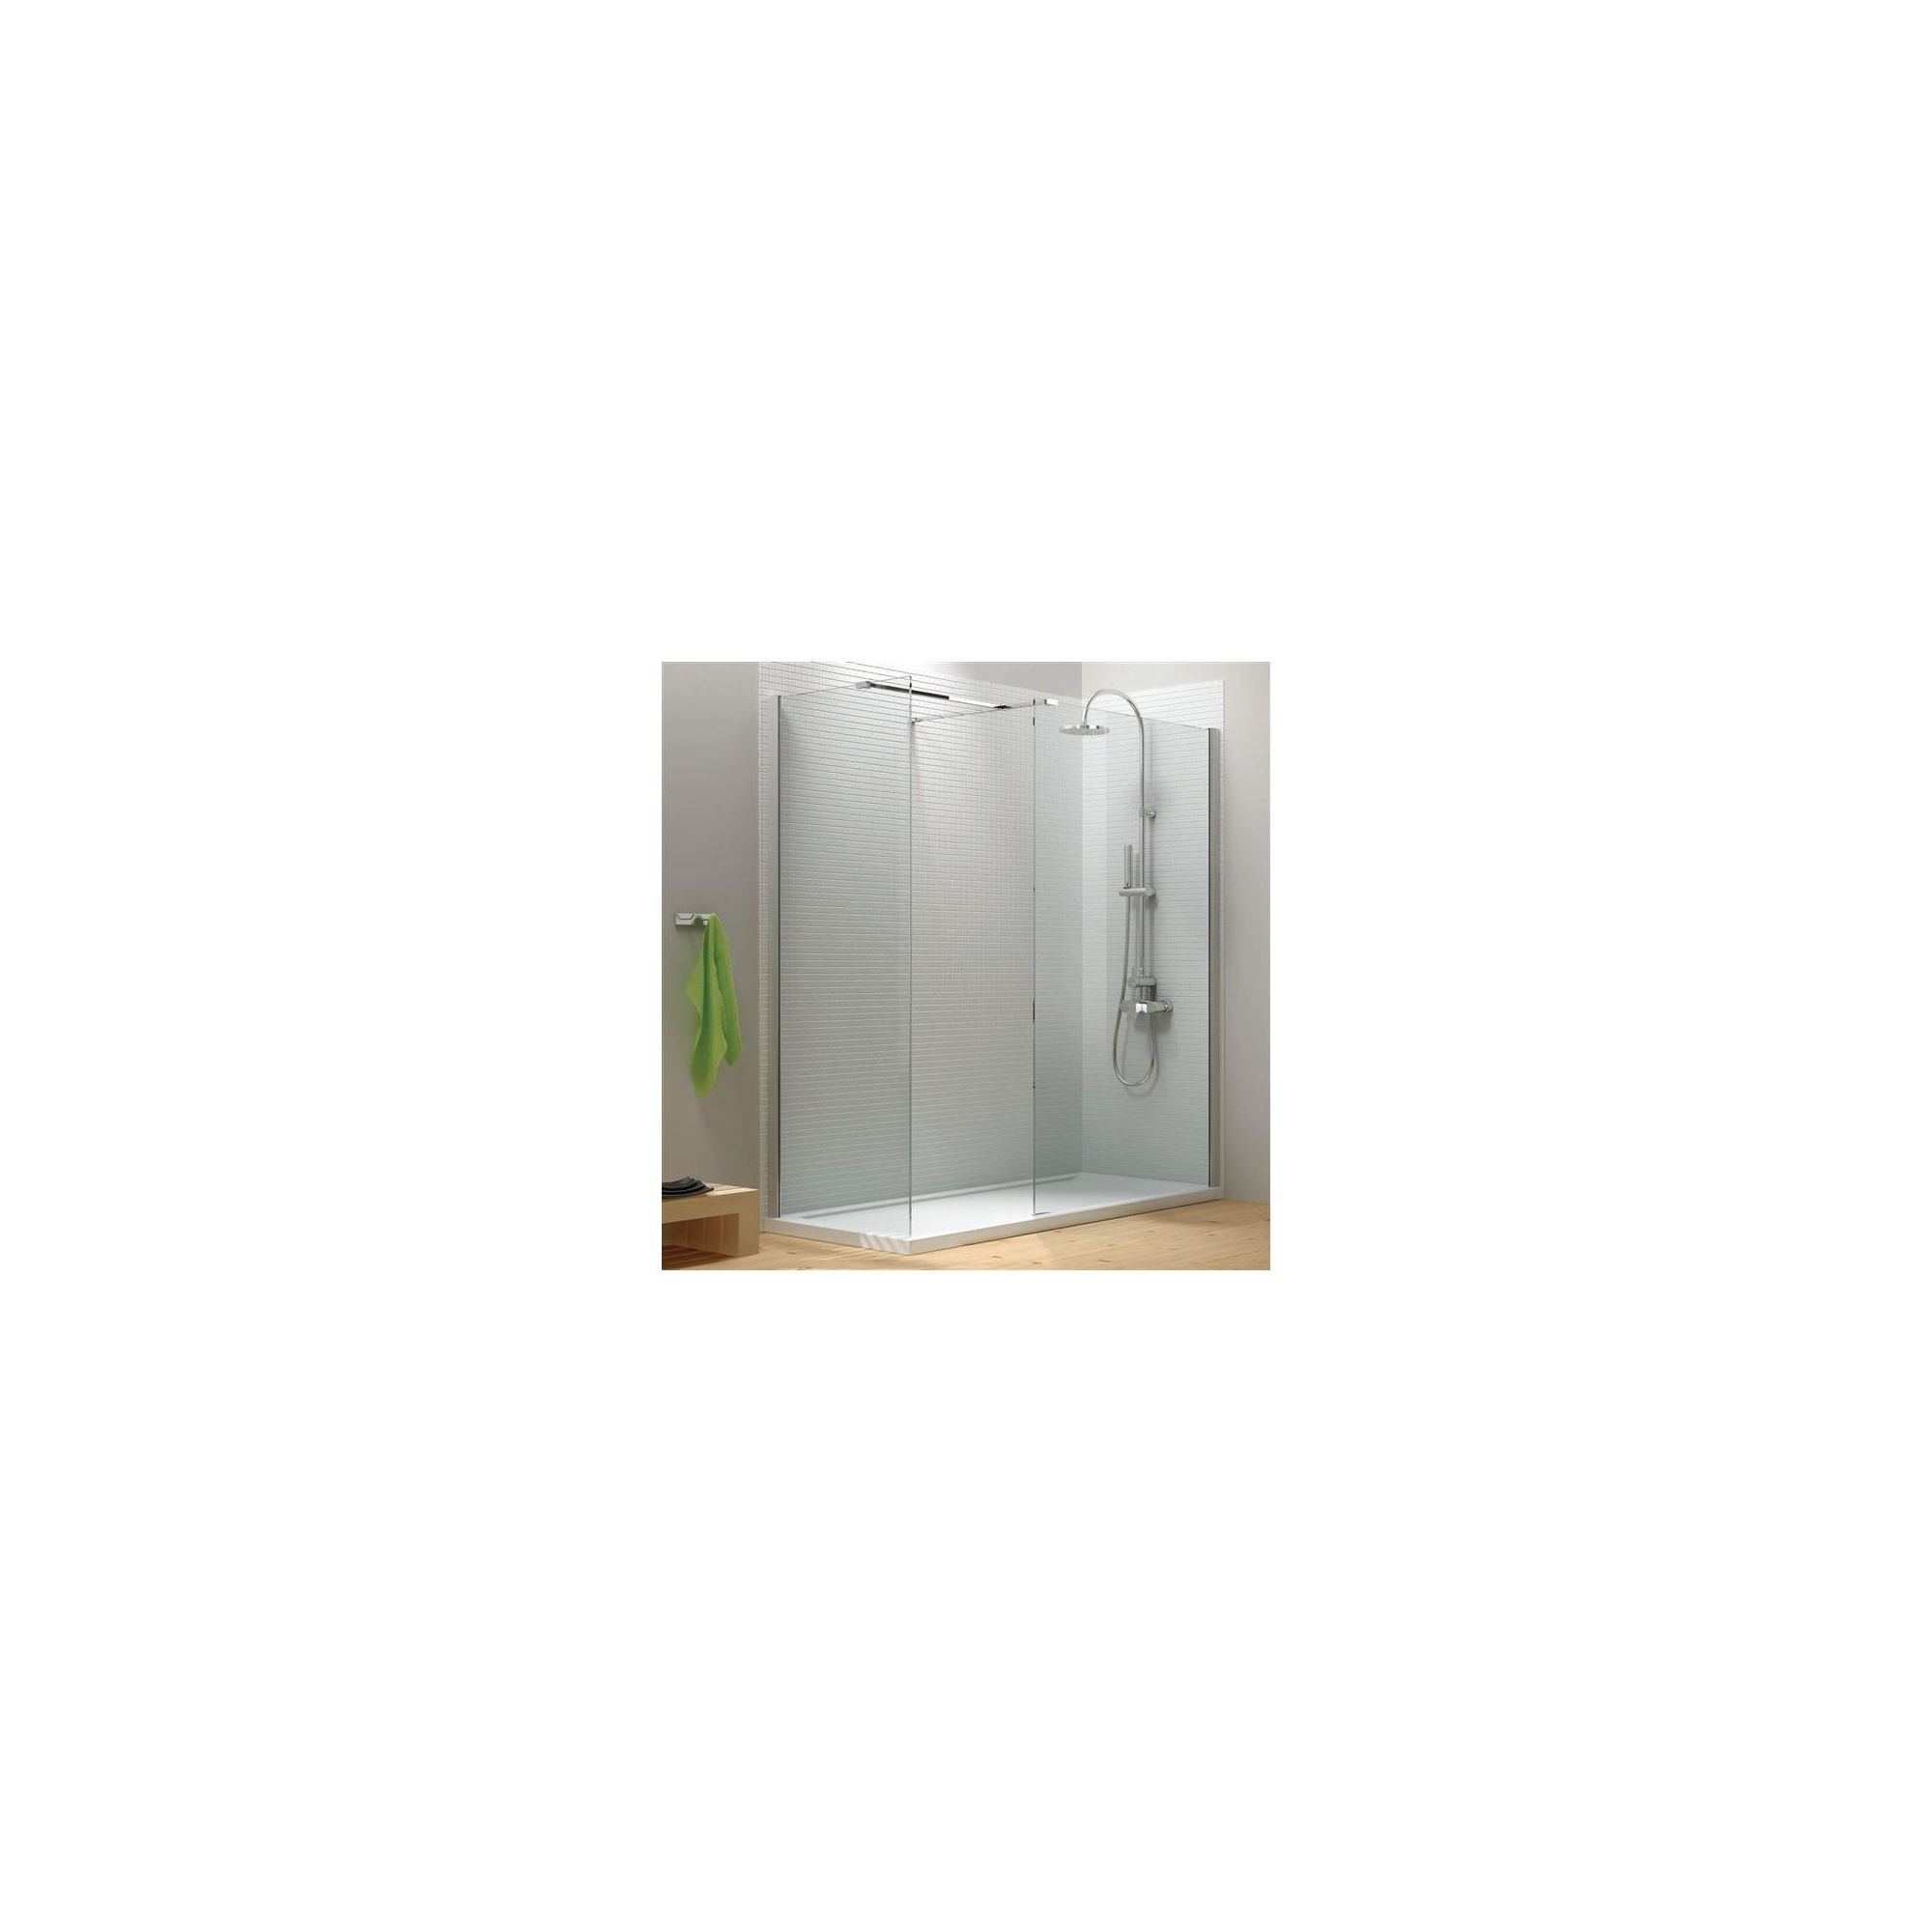 Merlyn Vivid Eight Walk-In Shower Enclosure, 1600mm x 800mm, excluding Tray, 8mm Glass at Tesco Direct